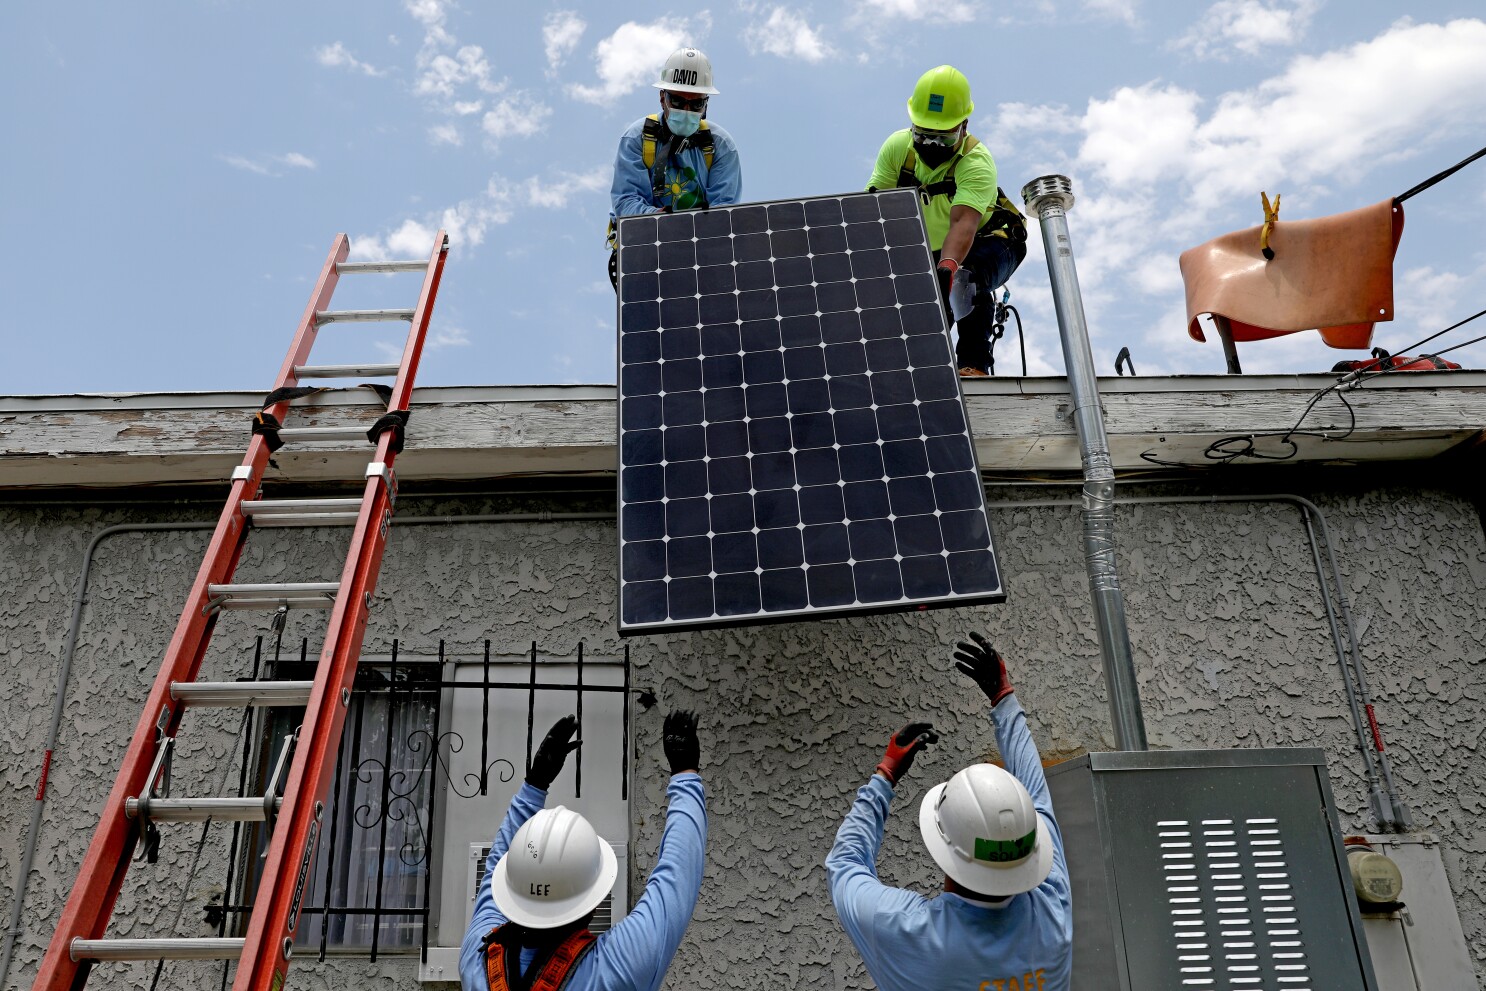 California might gut incentives for solar panels. 